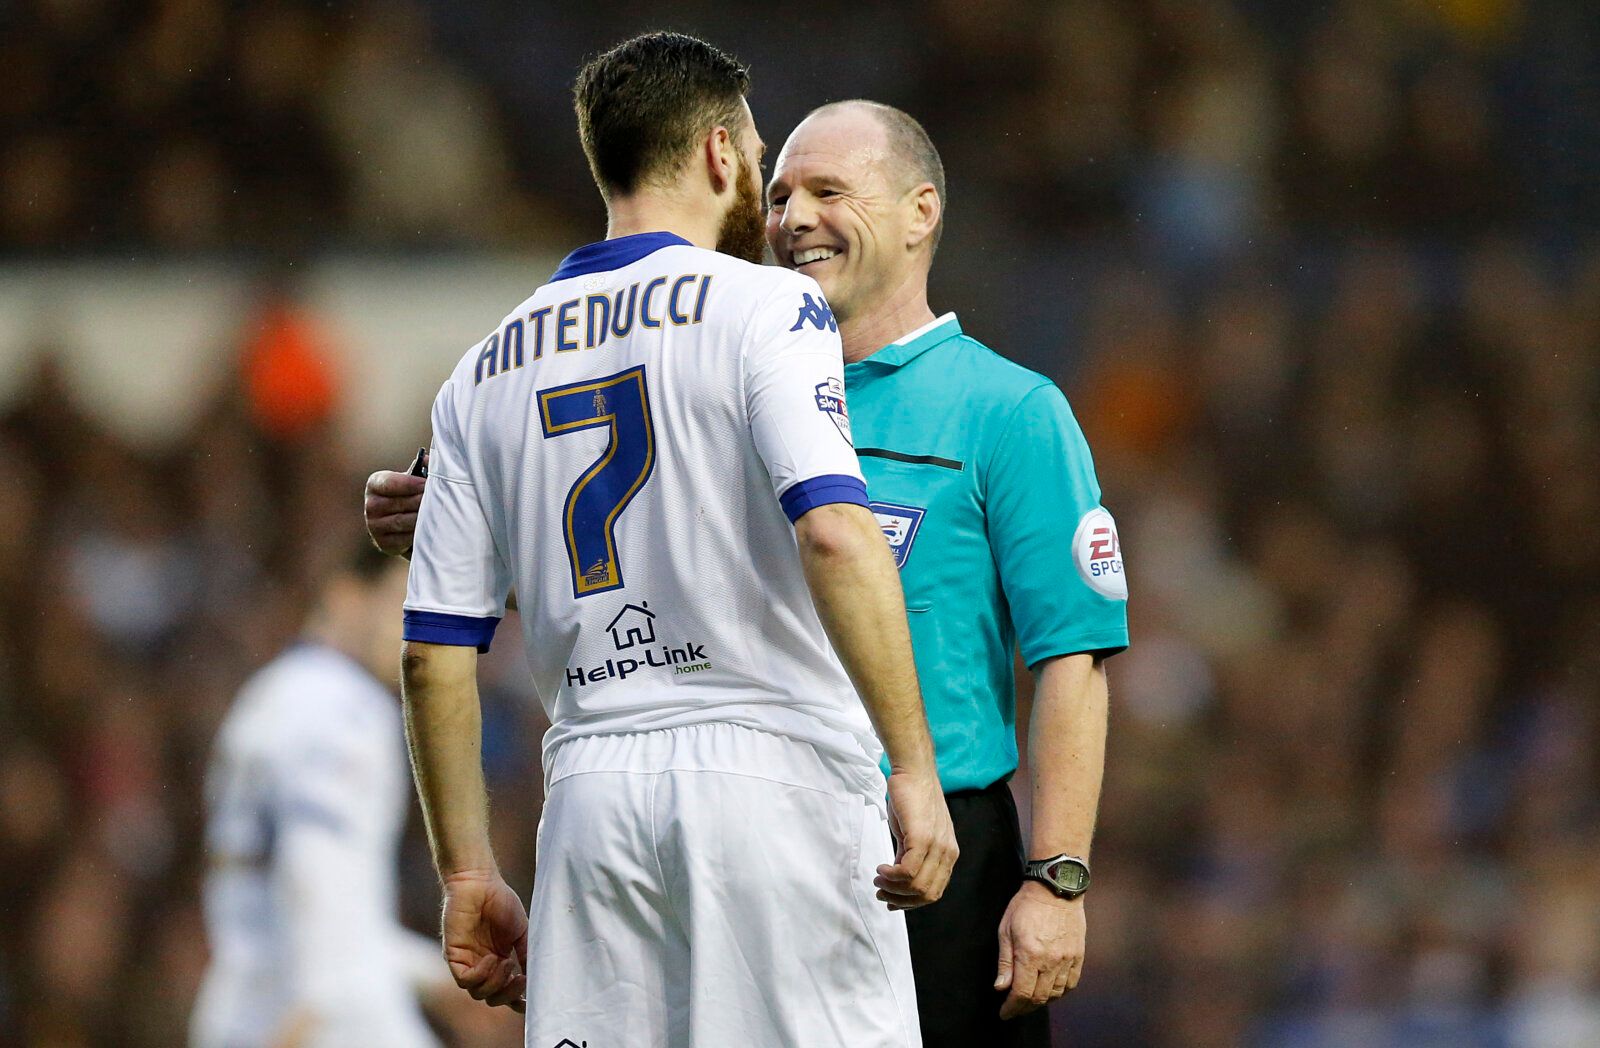 Football Soccer - Leeds United v Nottingham Forest - Sky Bet Football League Championship - Elland Road - 6/2/16 
Mirco Antenucci of Leeds United talks to referee Scott Duncan 
Mandatory Credit: Action Images / John Clifton 
Livepic 
EDITORIAL USE ONLY. No use with unauthorized audio, video, data, fixture lists, club/league logos or 